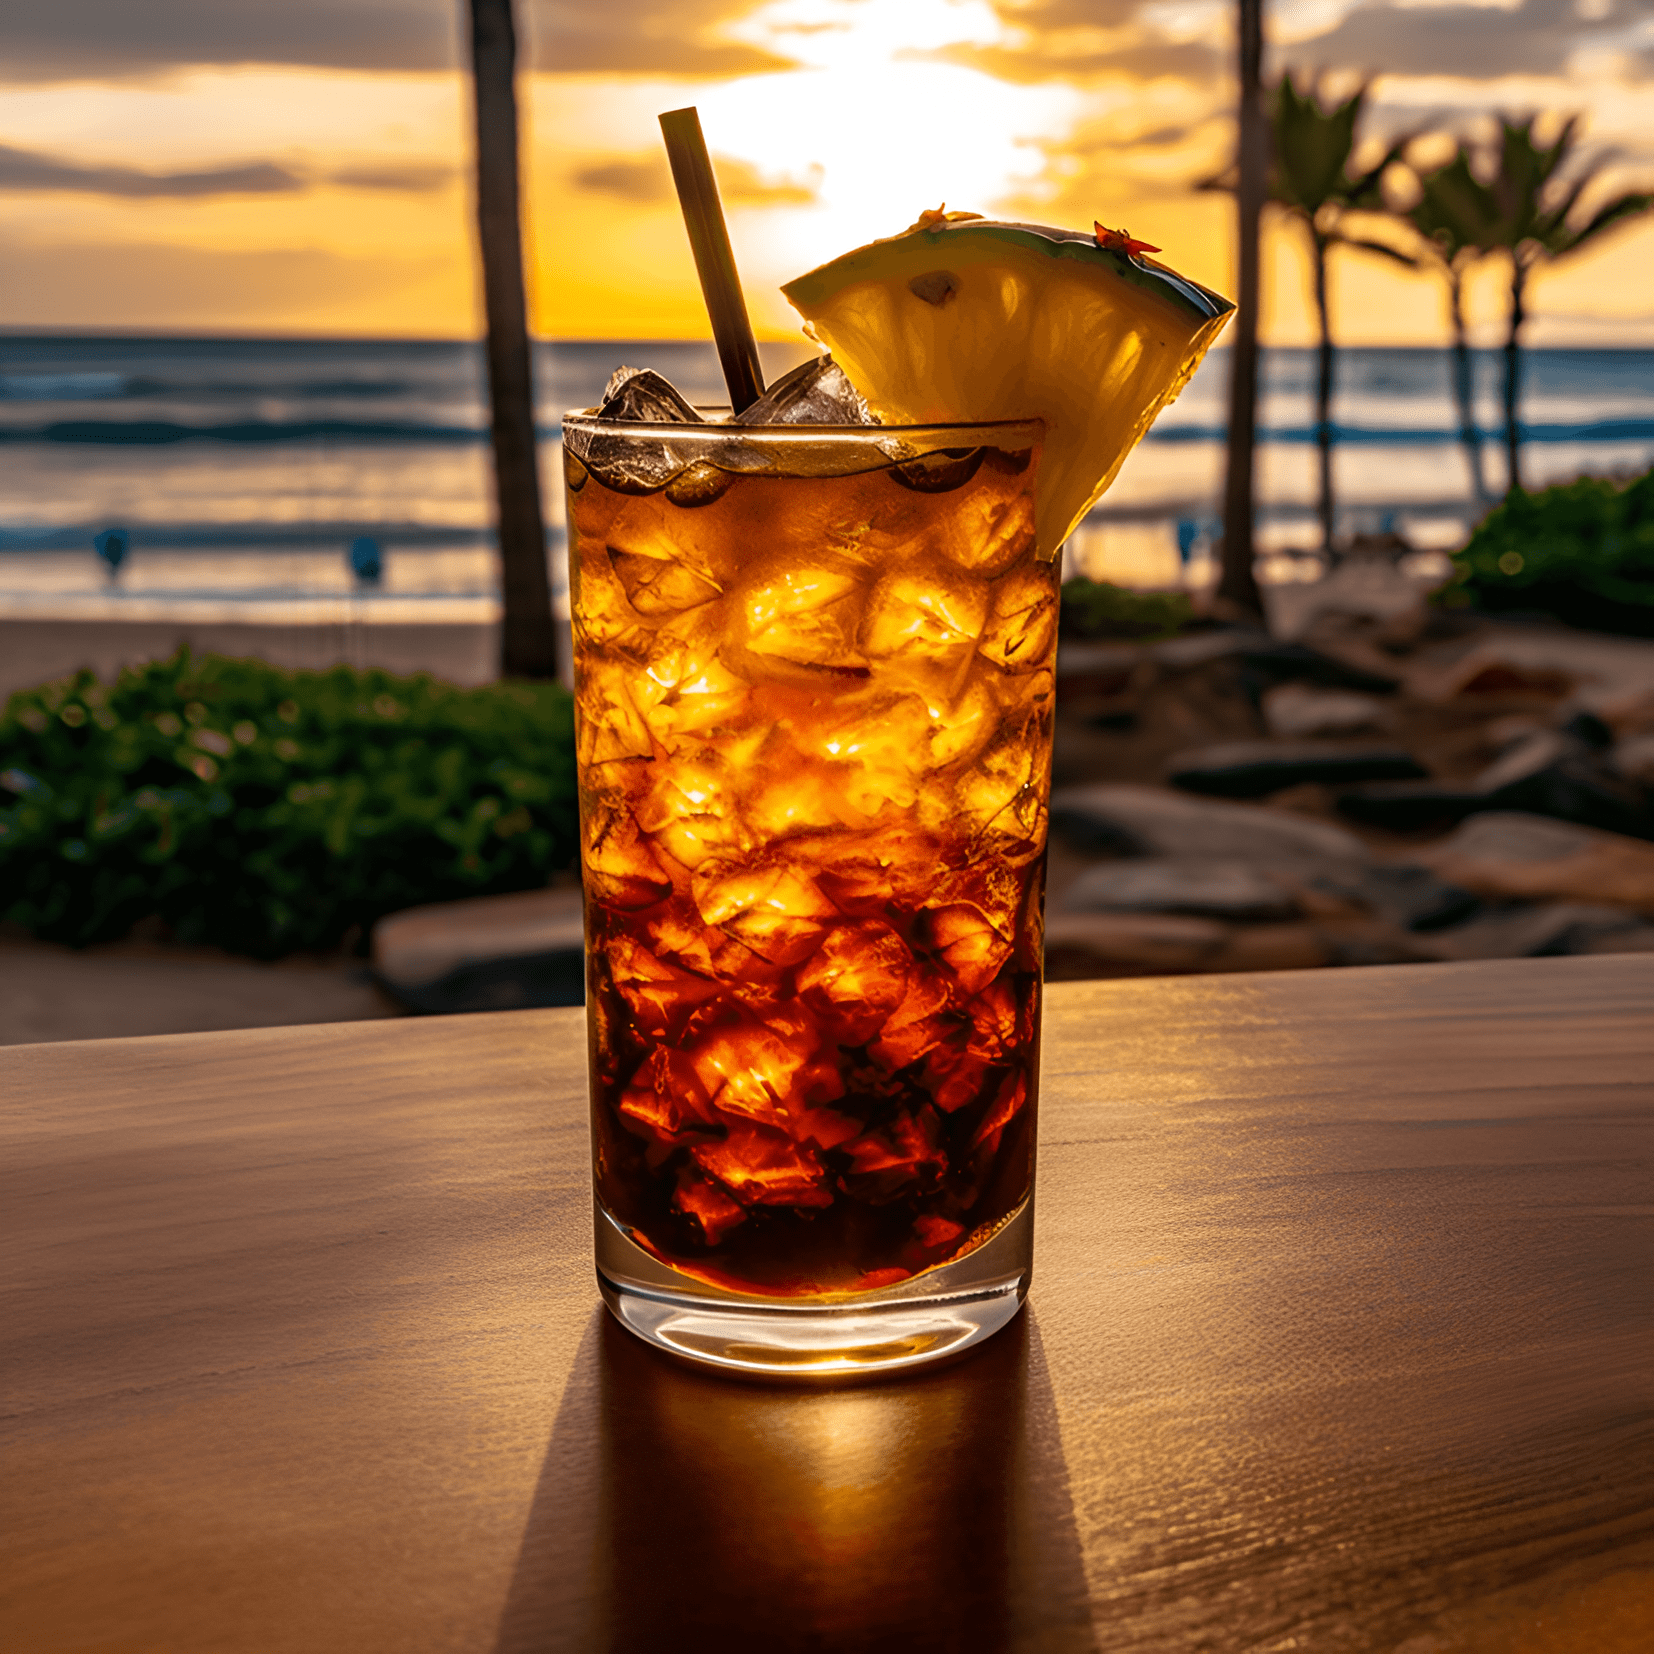 Hawaiian Iced Tea Cocktail Recipe - The Hawaiian Iced Tea has a sweet and tangy taste, with a hint of tropical fruitiness. The combination of various spirits gives it a strong, yet well-balanced flavor. The addition of pineapple juice adds a refreshing and exotic touch.